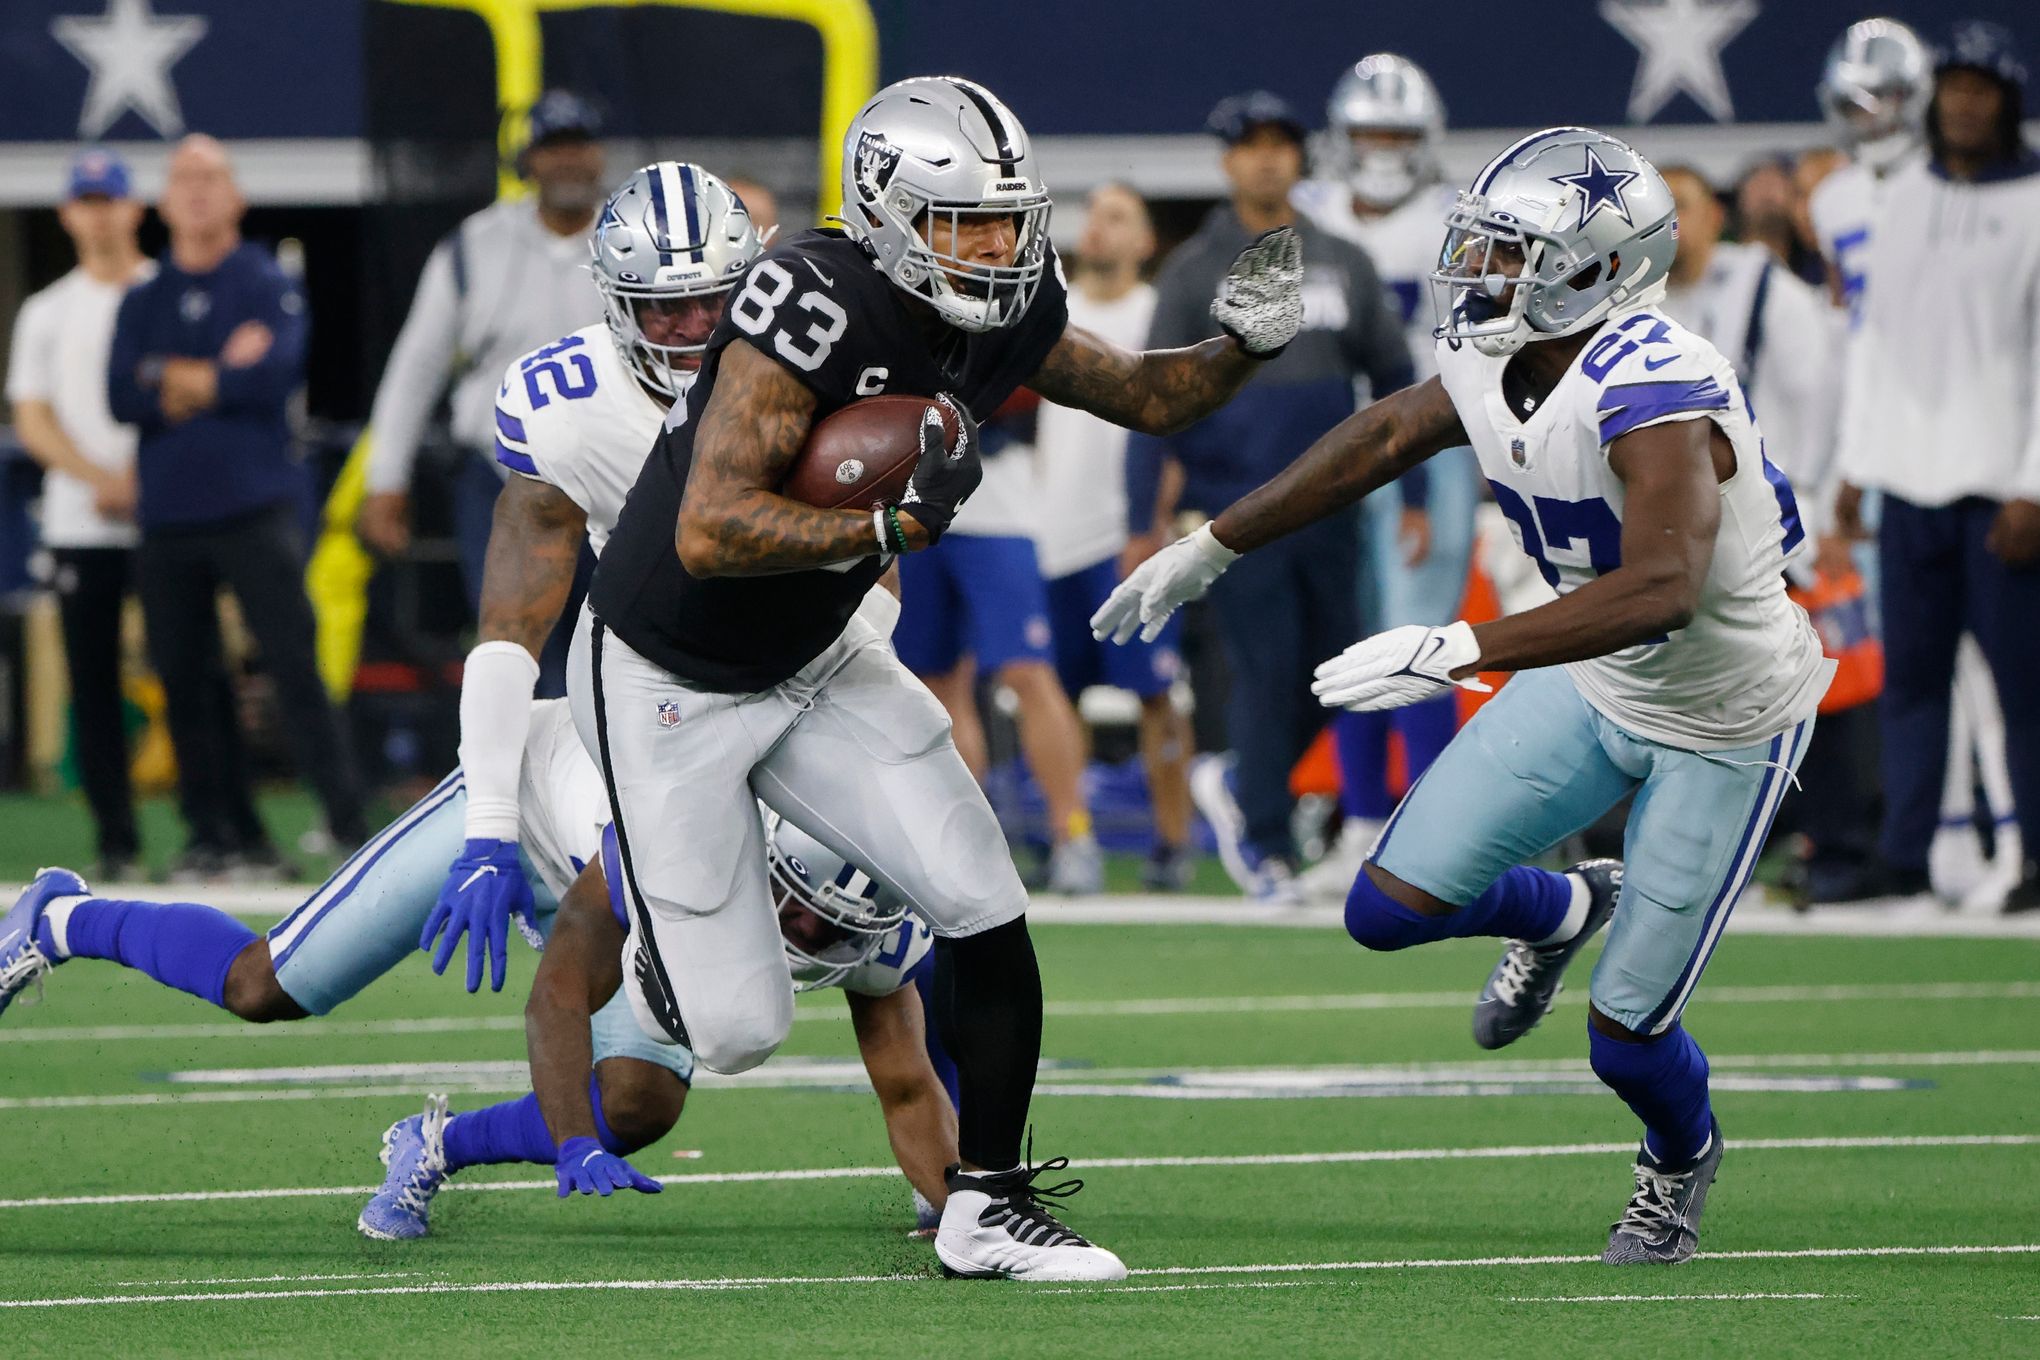 The Raiders' Darren Waller was second in the NFL in catches. On